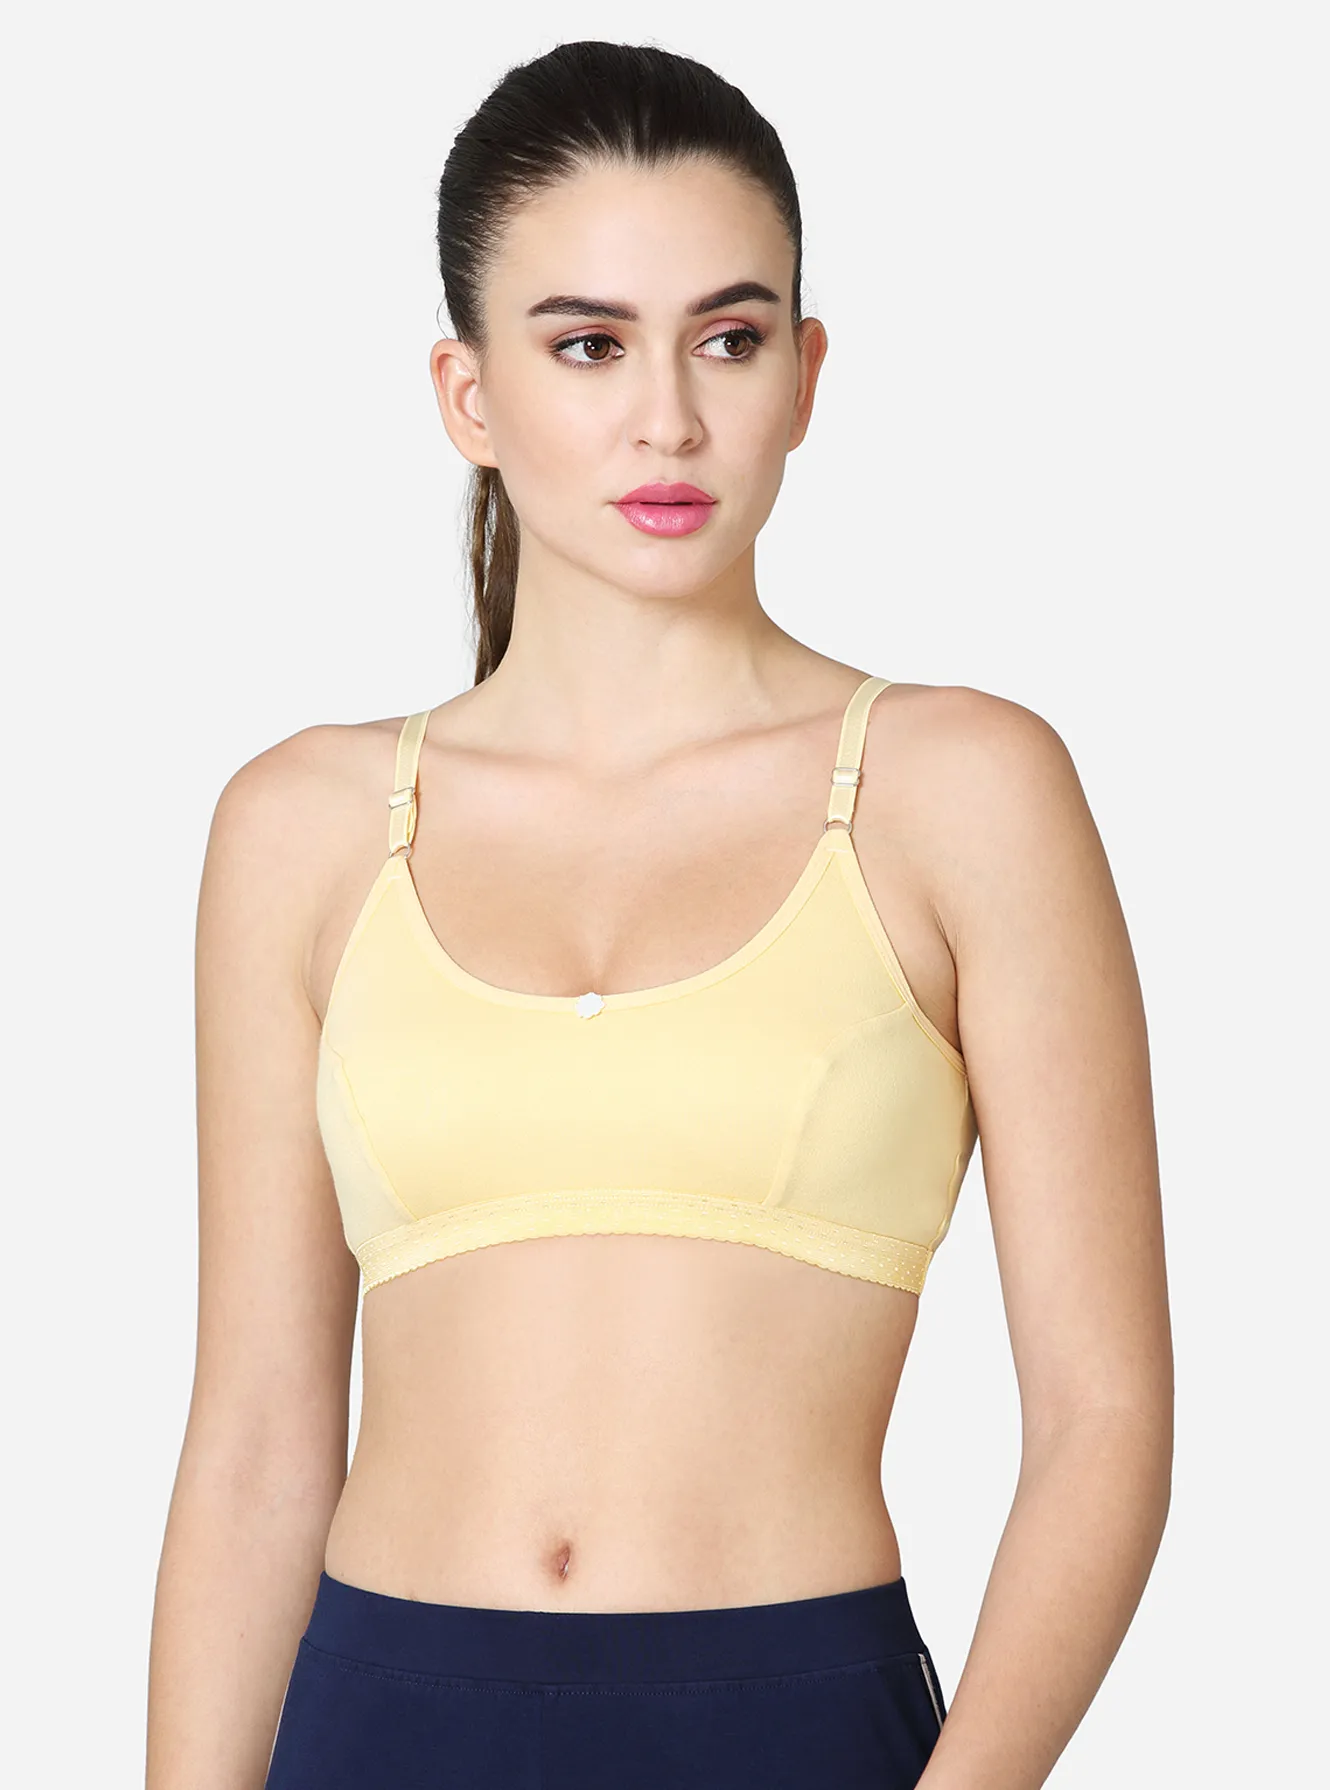 Camisole style double layered slip-on bra with adjustable straps